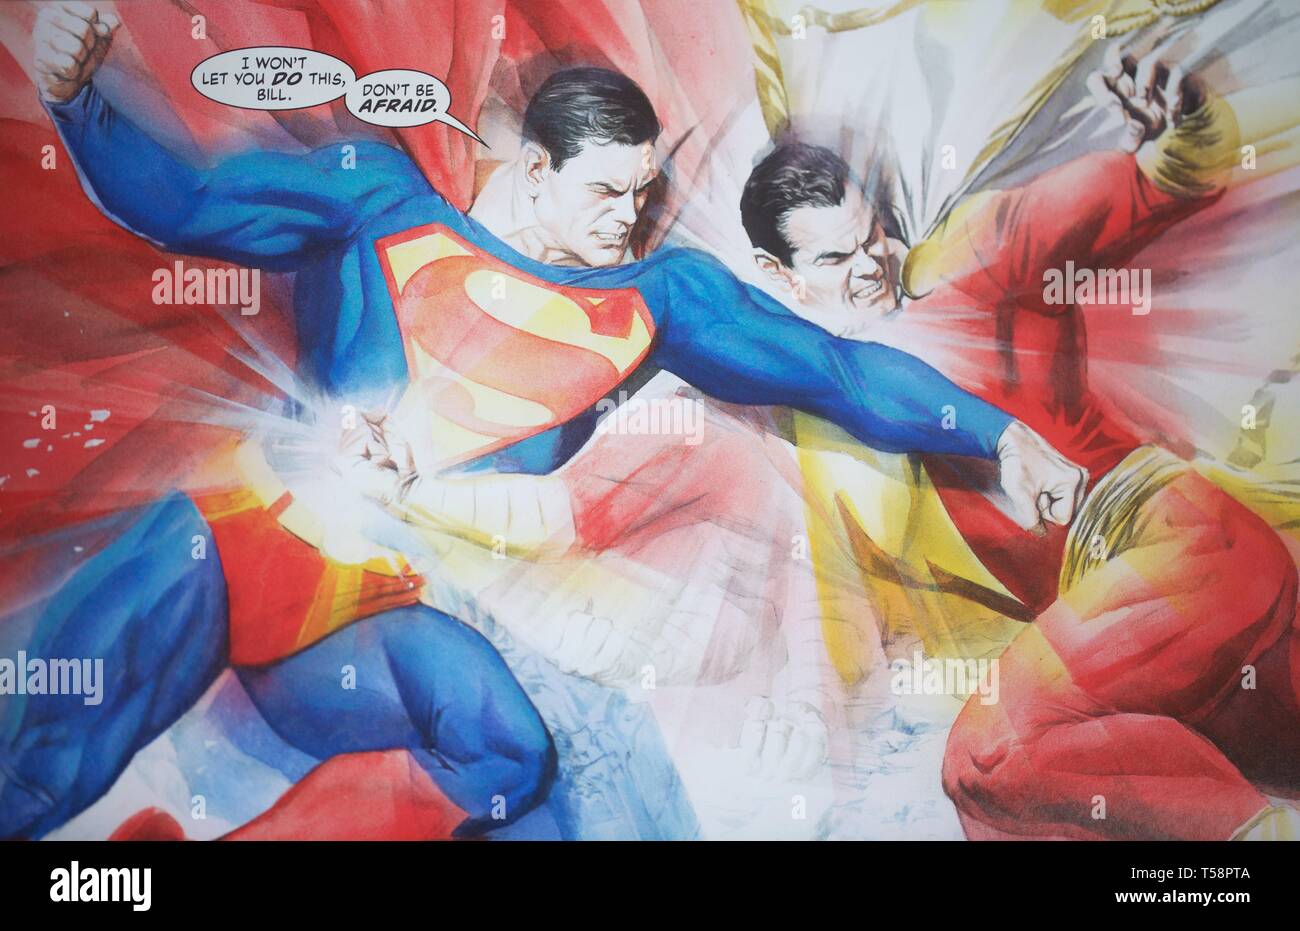 Shazam fighting superman, comic character published by DC Comics Stock Photo